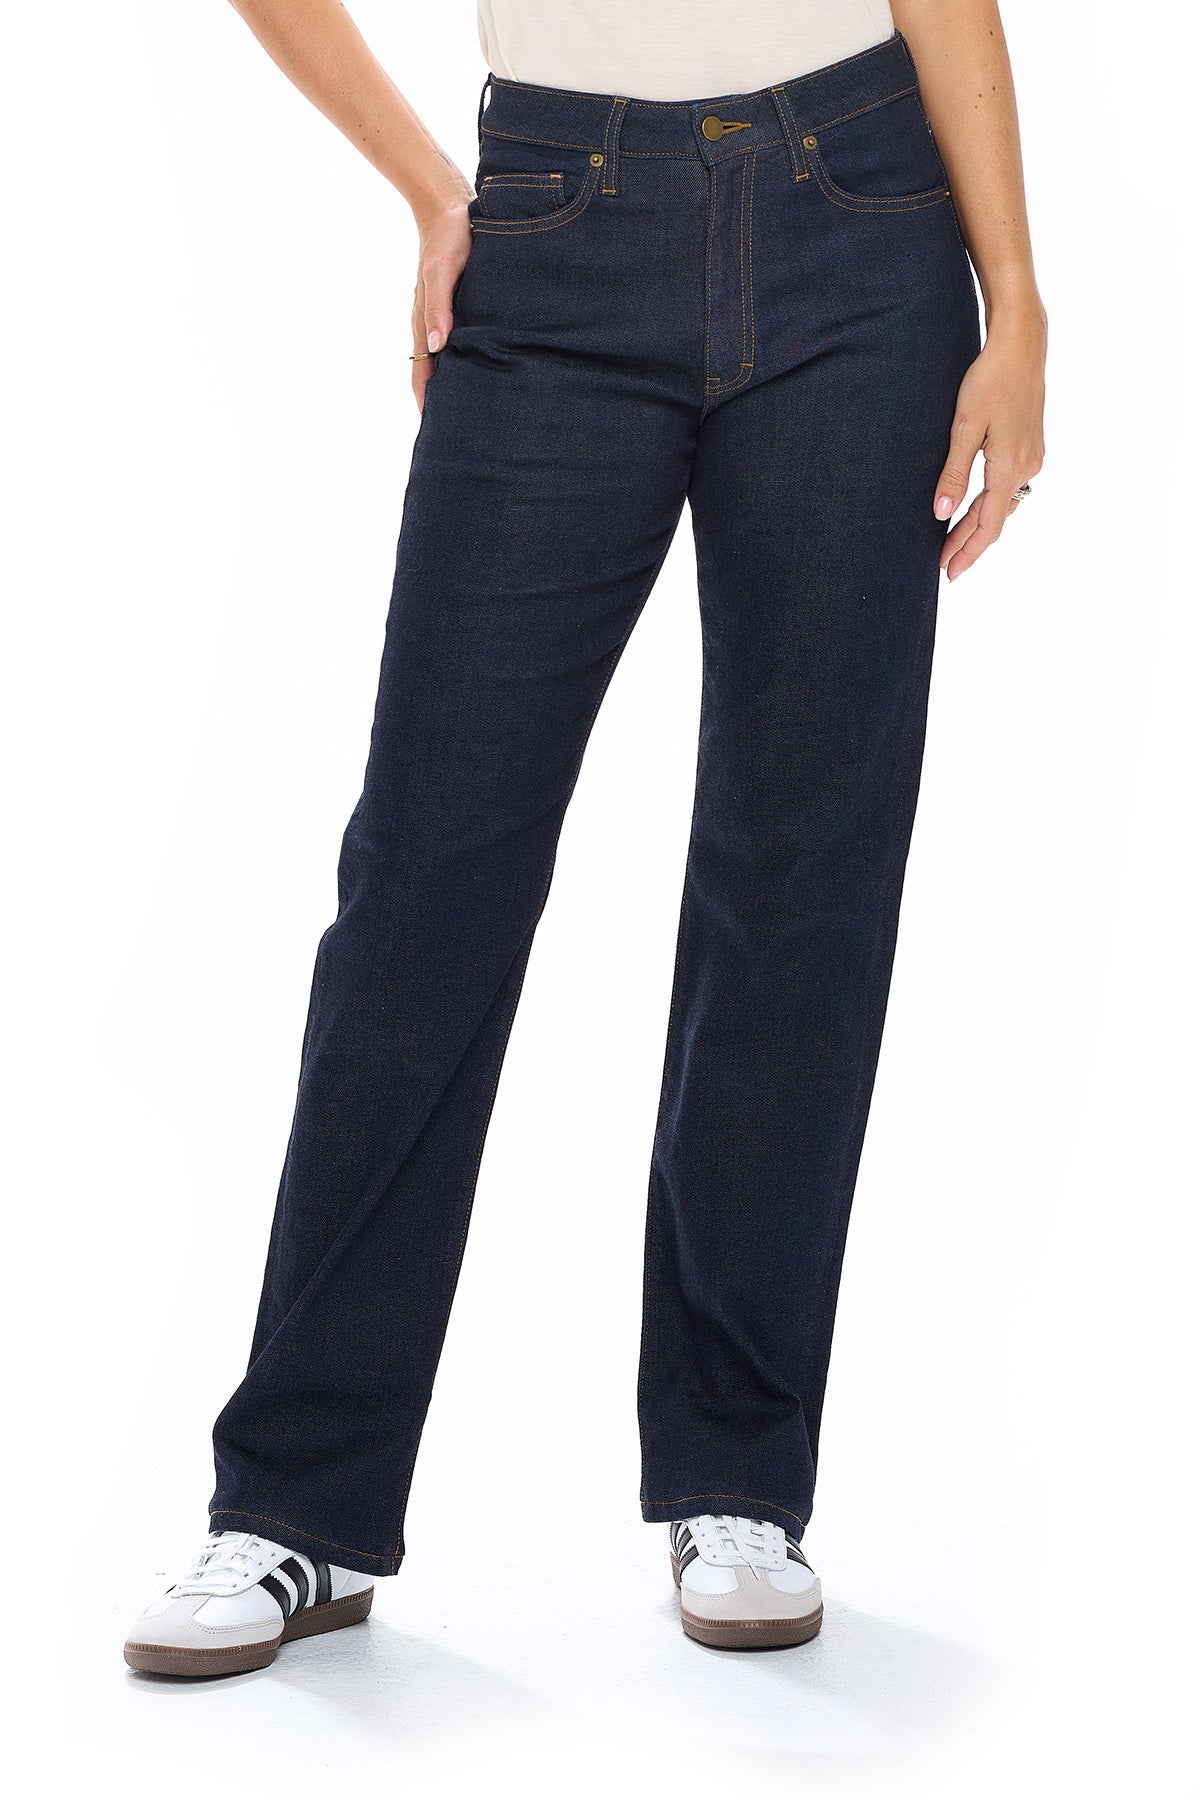 The relaxed concorde dark indigo travel pants for women designed by Aviator